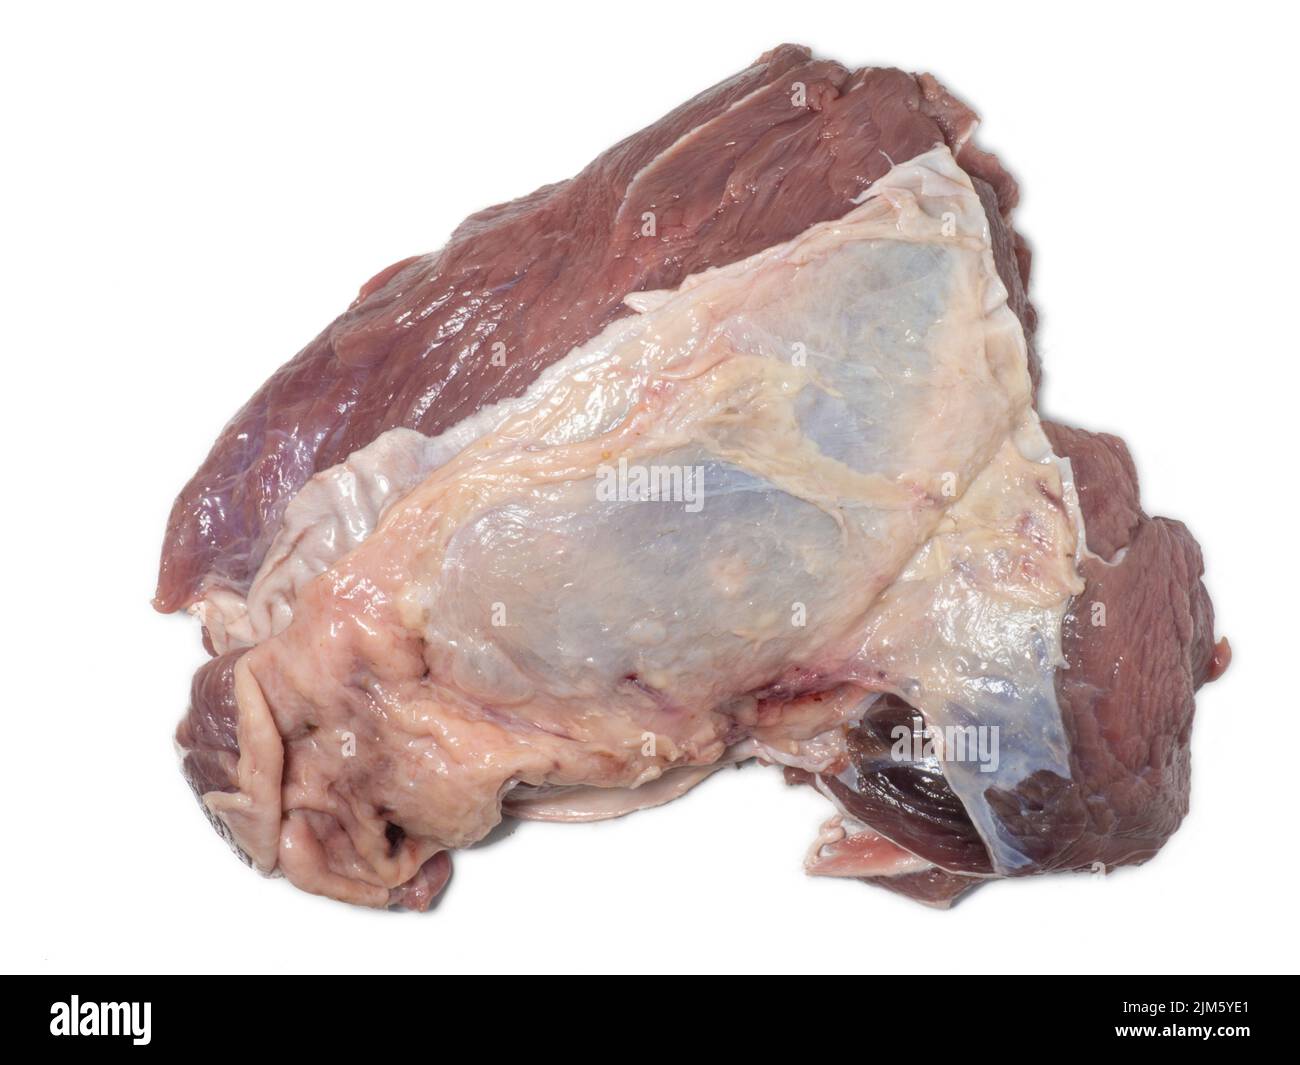 A piece of raw beef on a white background. Juicy meat with veins. Unprepared product. Beef isolate. An ingredient for a hearty meal. Cooking Stock Photo